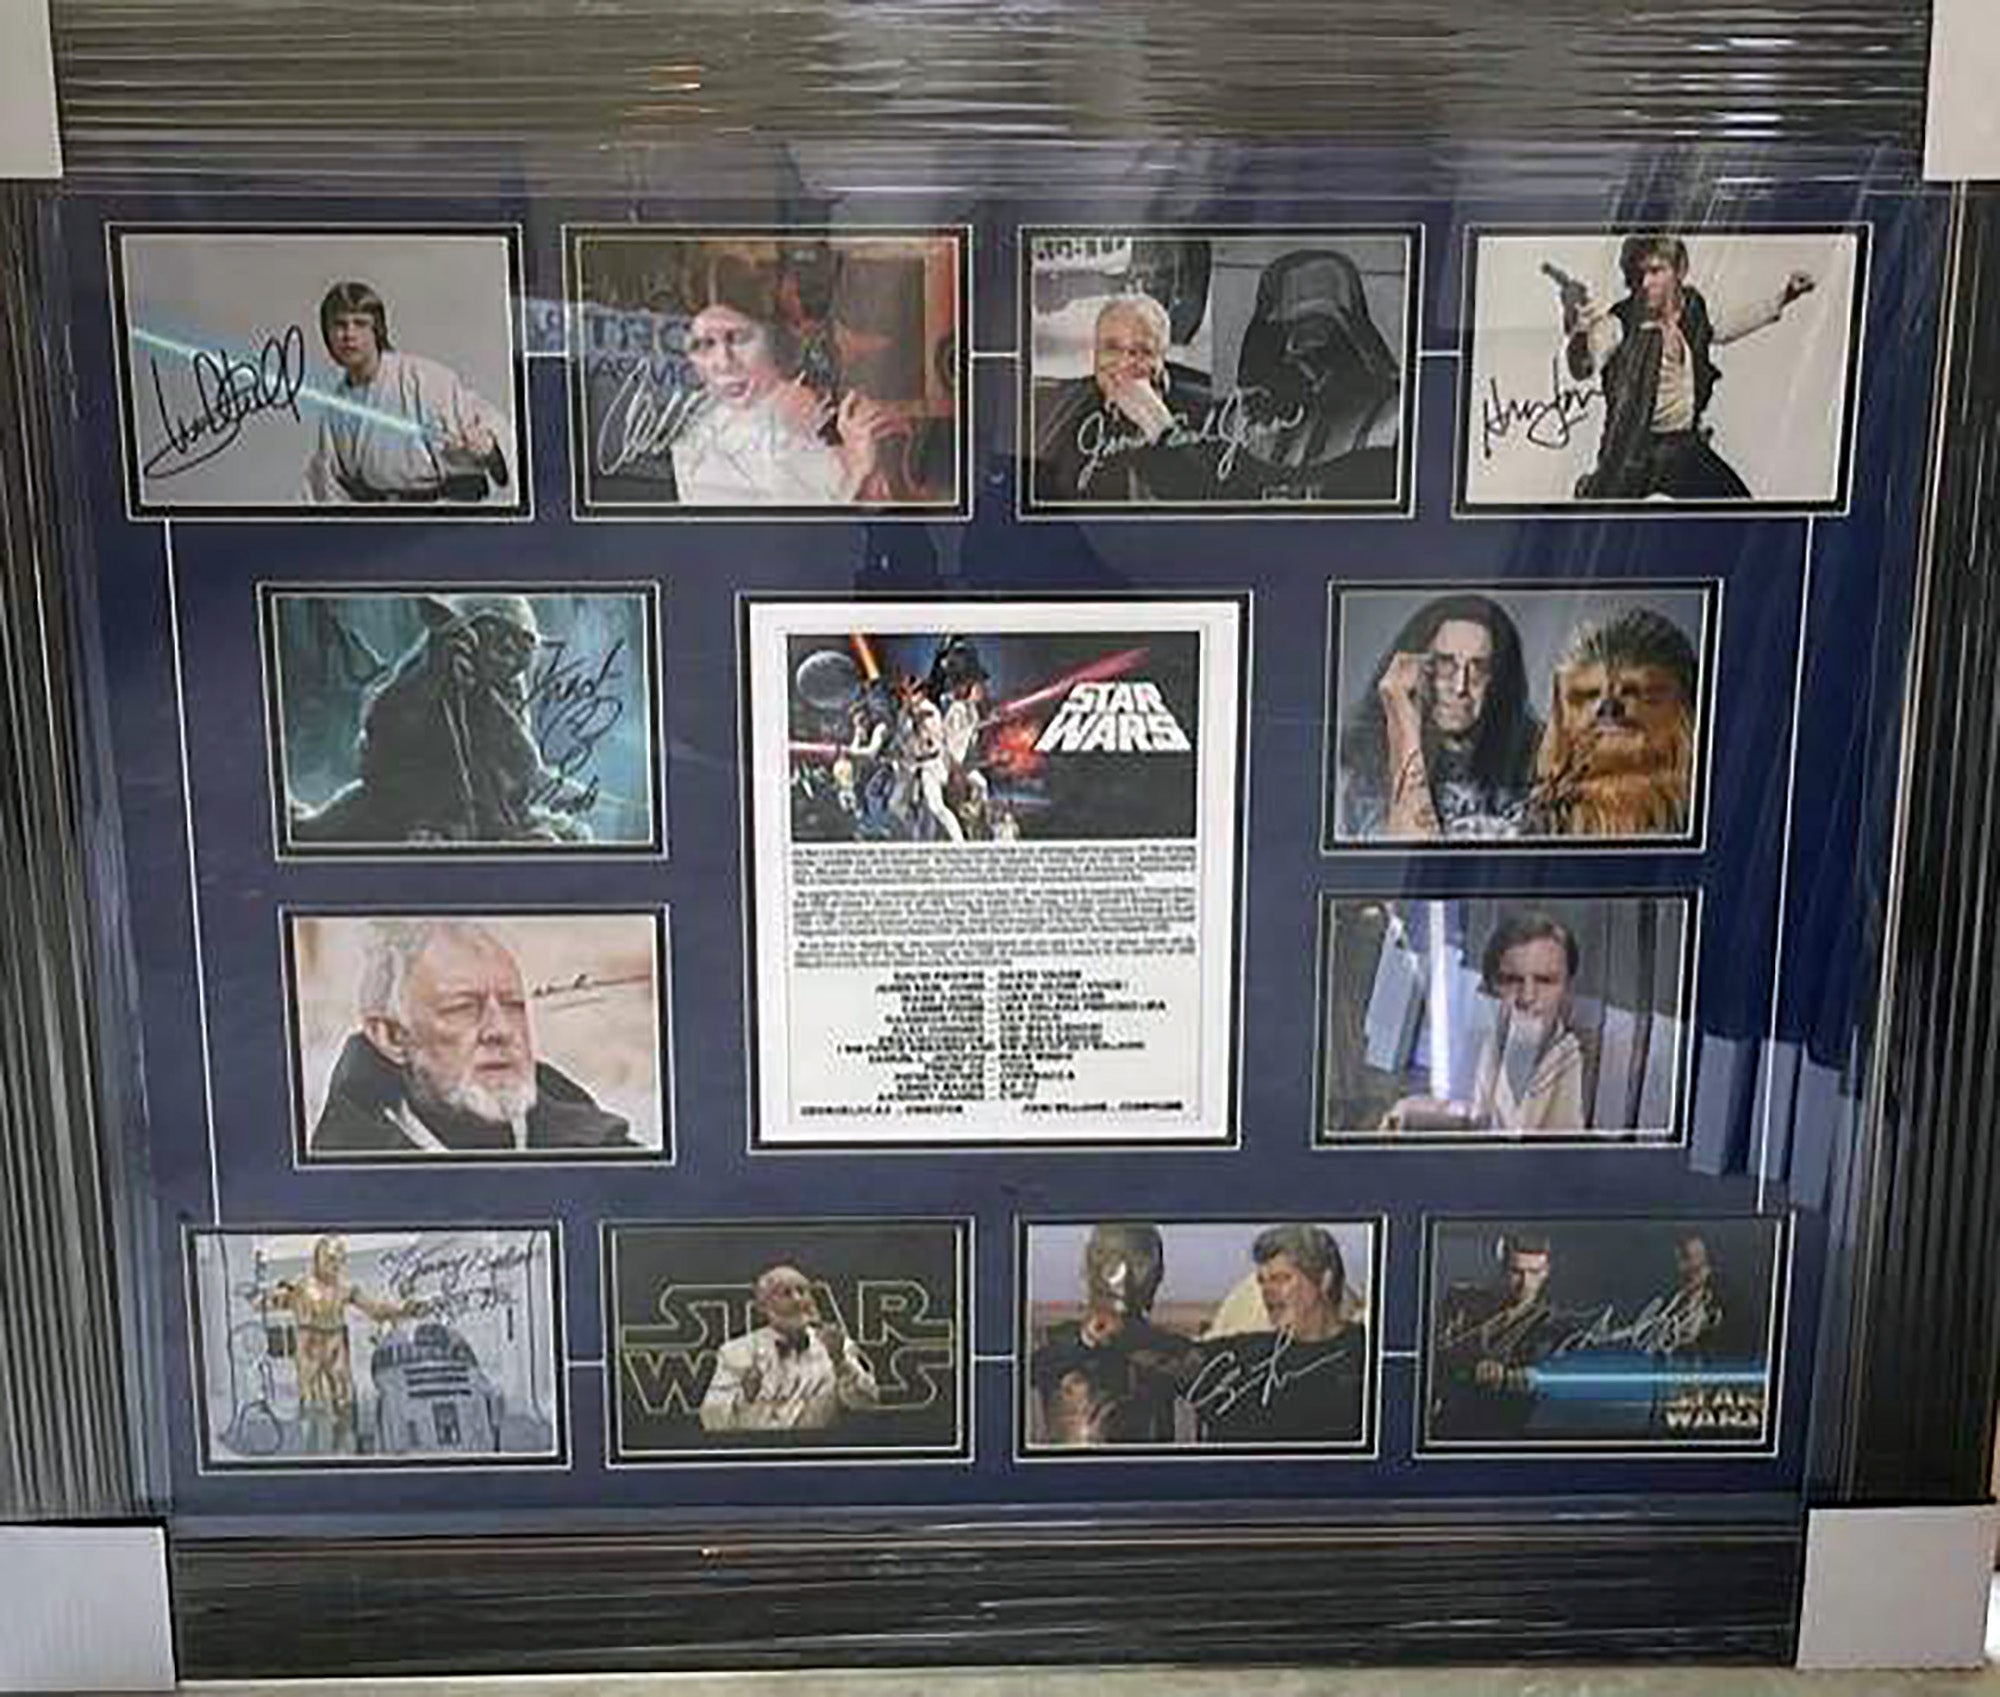 Star Wars Cast Signed George Lucas, Carrie Fisher, Harrison Ford framed photo collection with proof